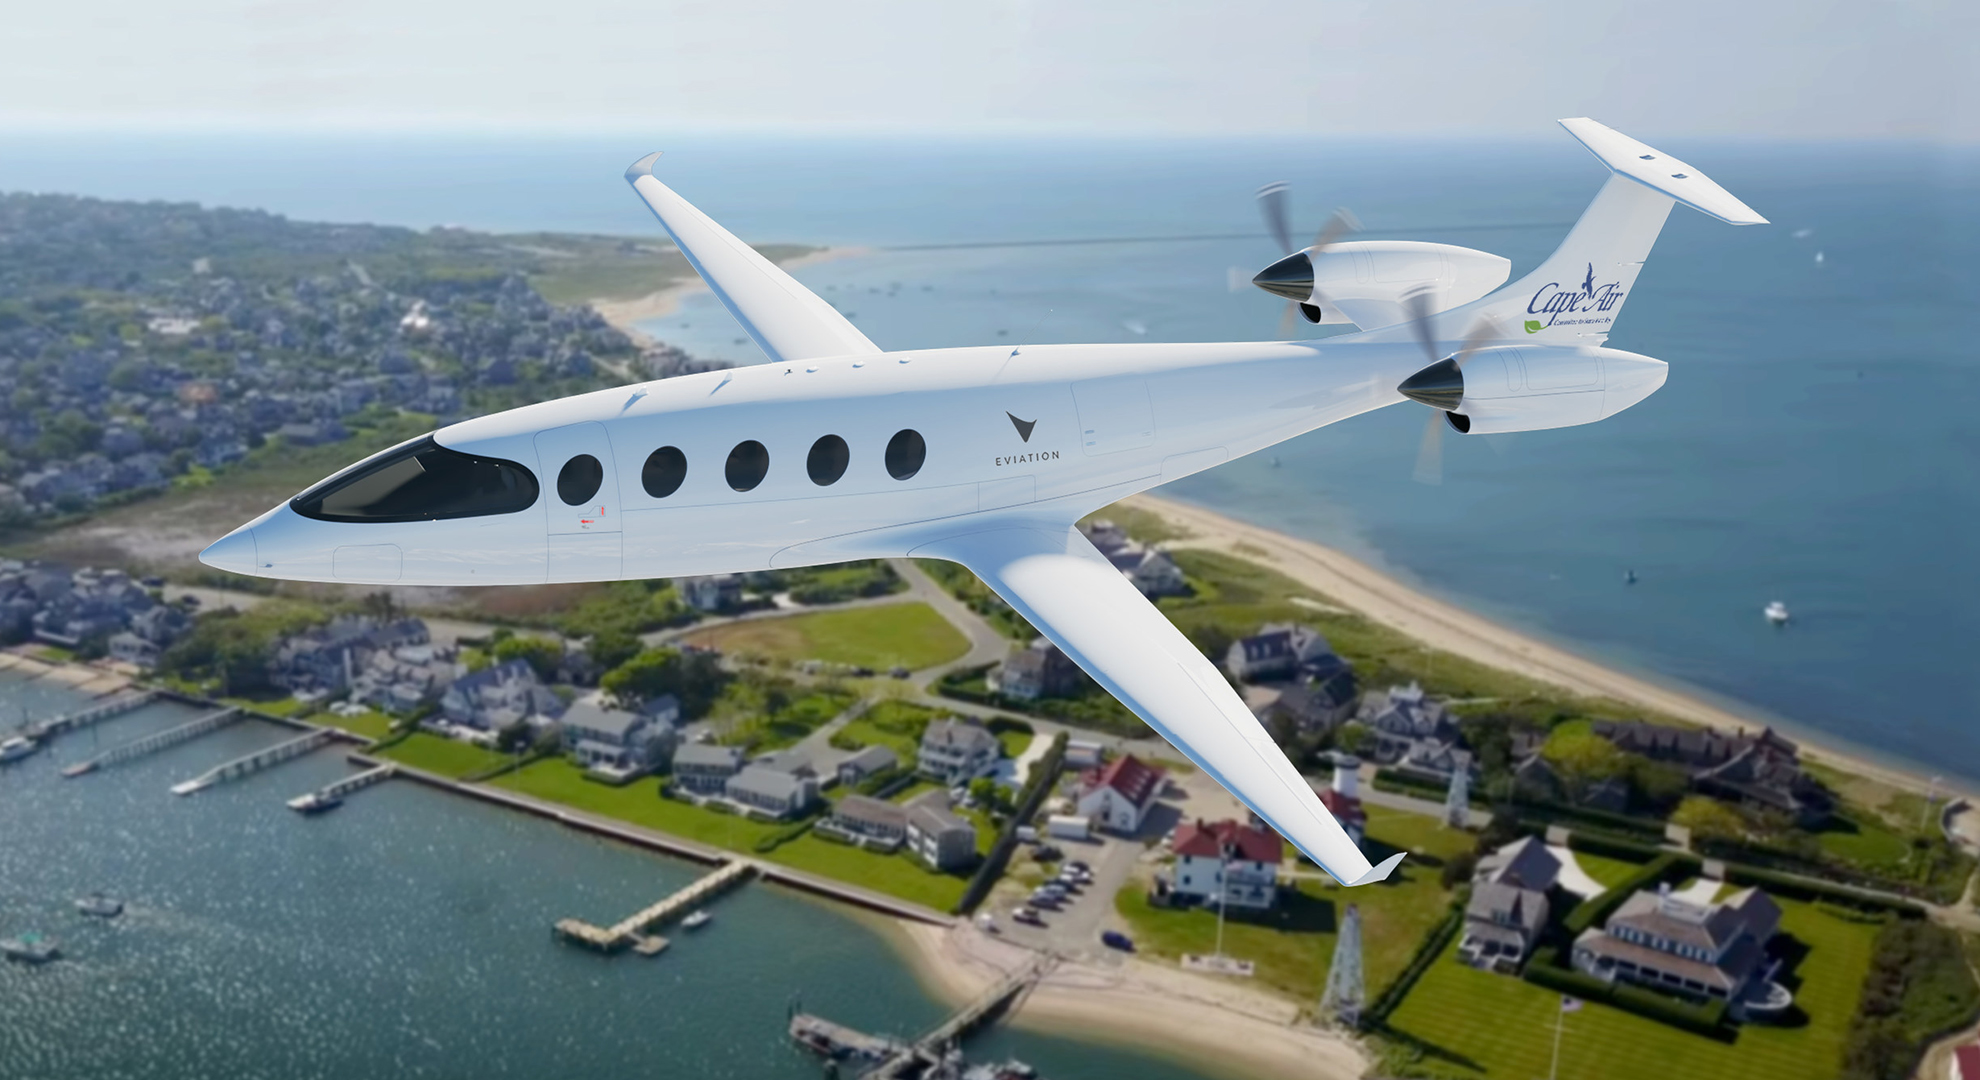 Cape Air To Buy 75 Electric Planes - CBS Boston